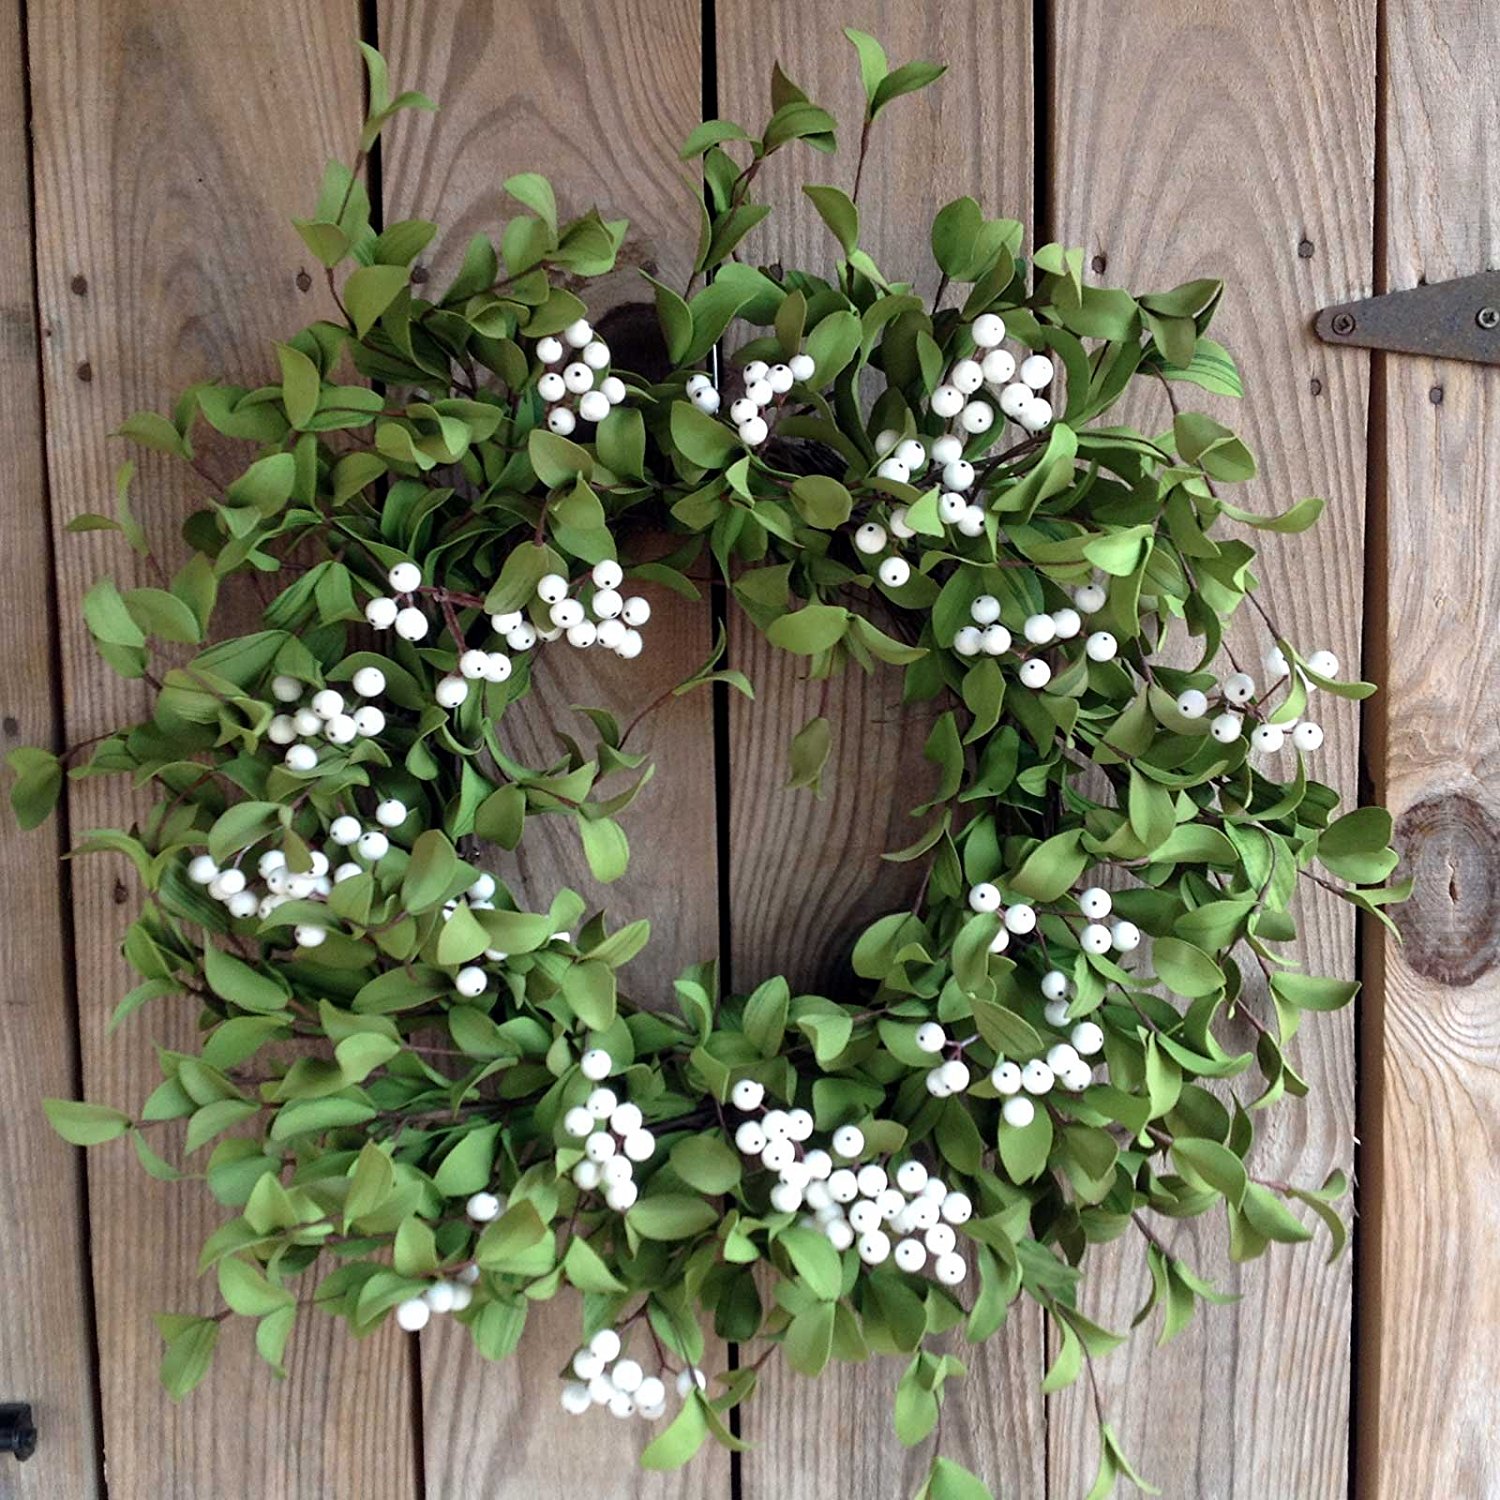 A large greenery wreath with white berries on a wooden door.